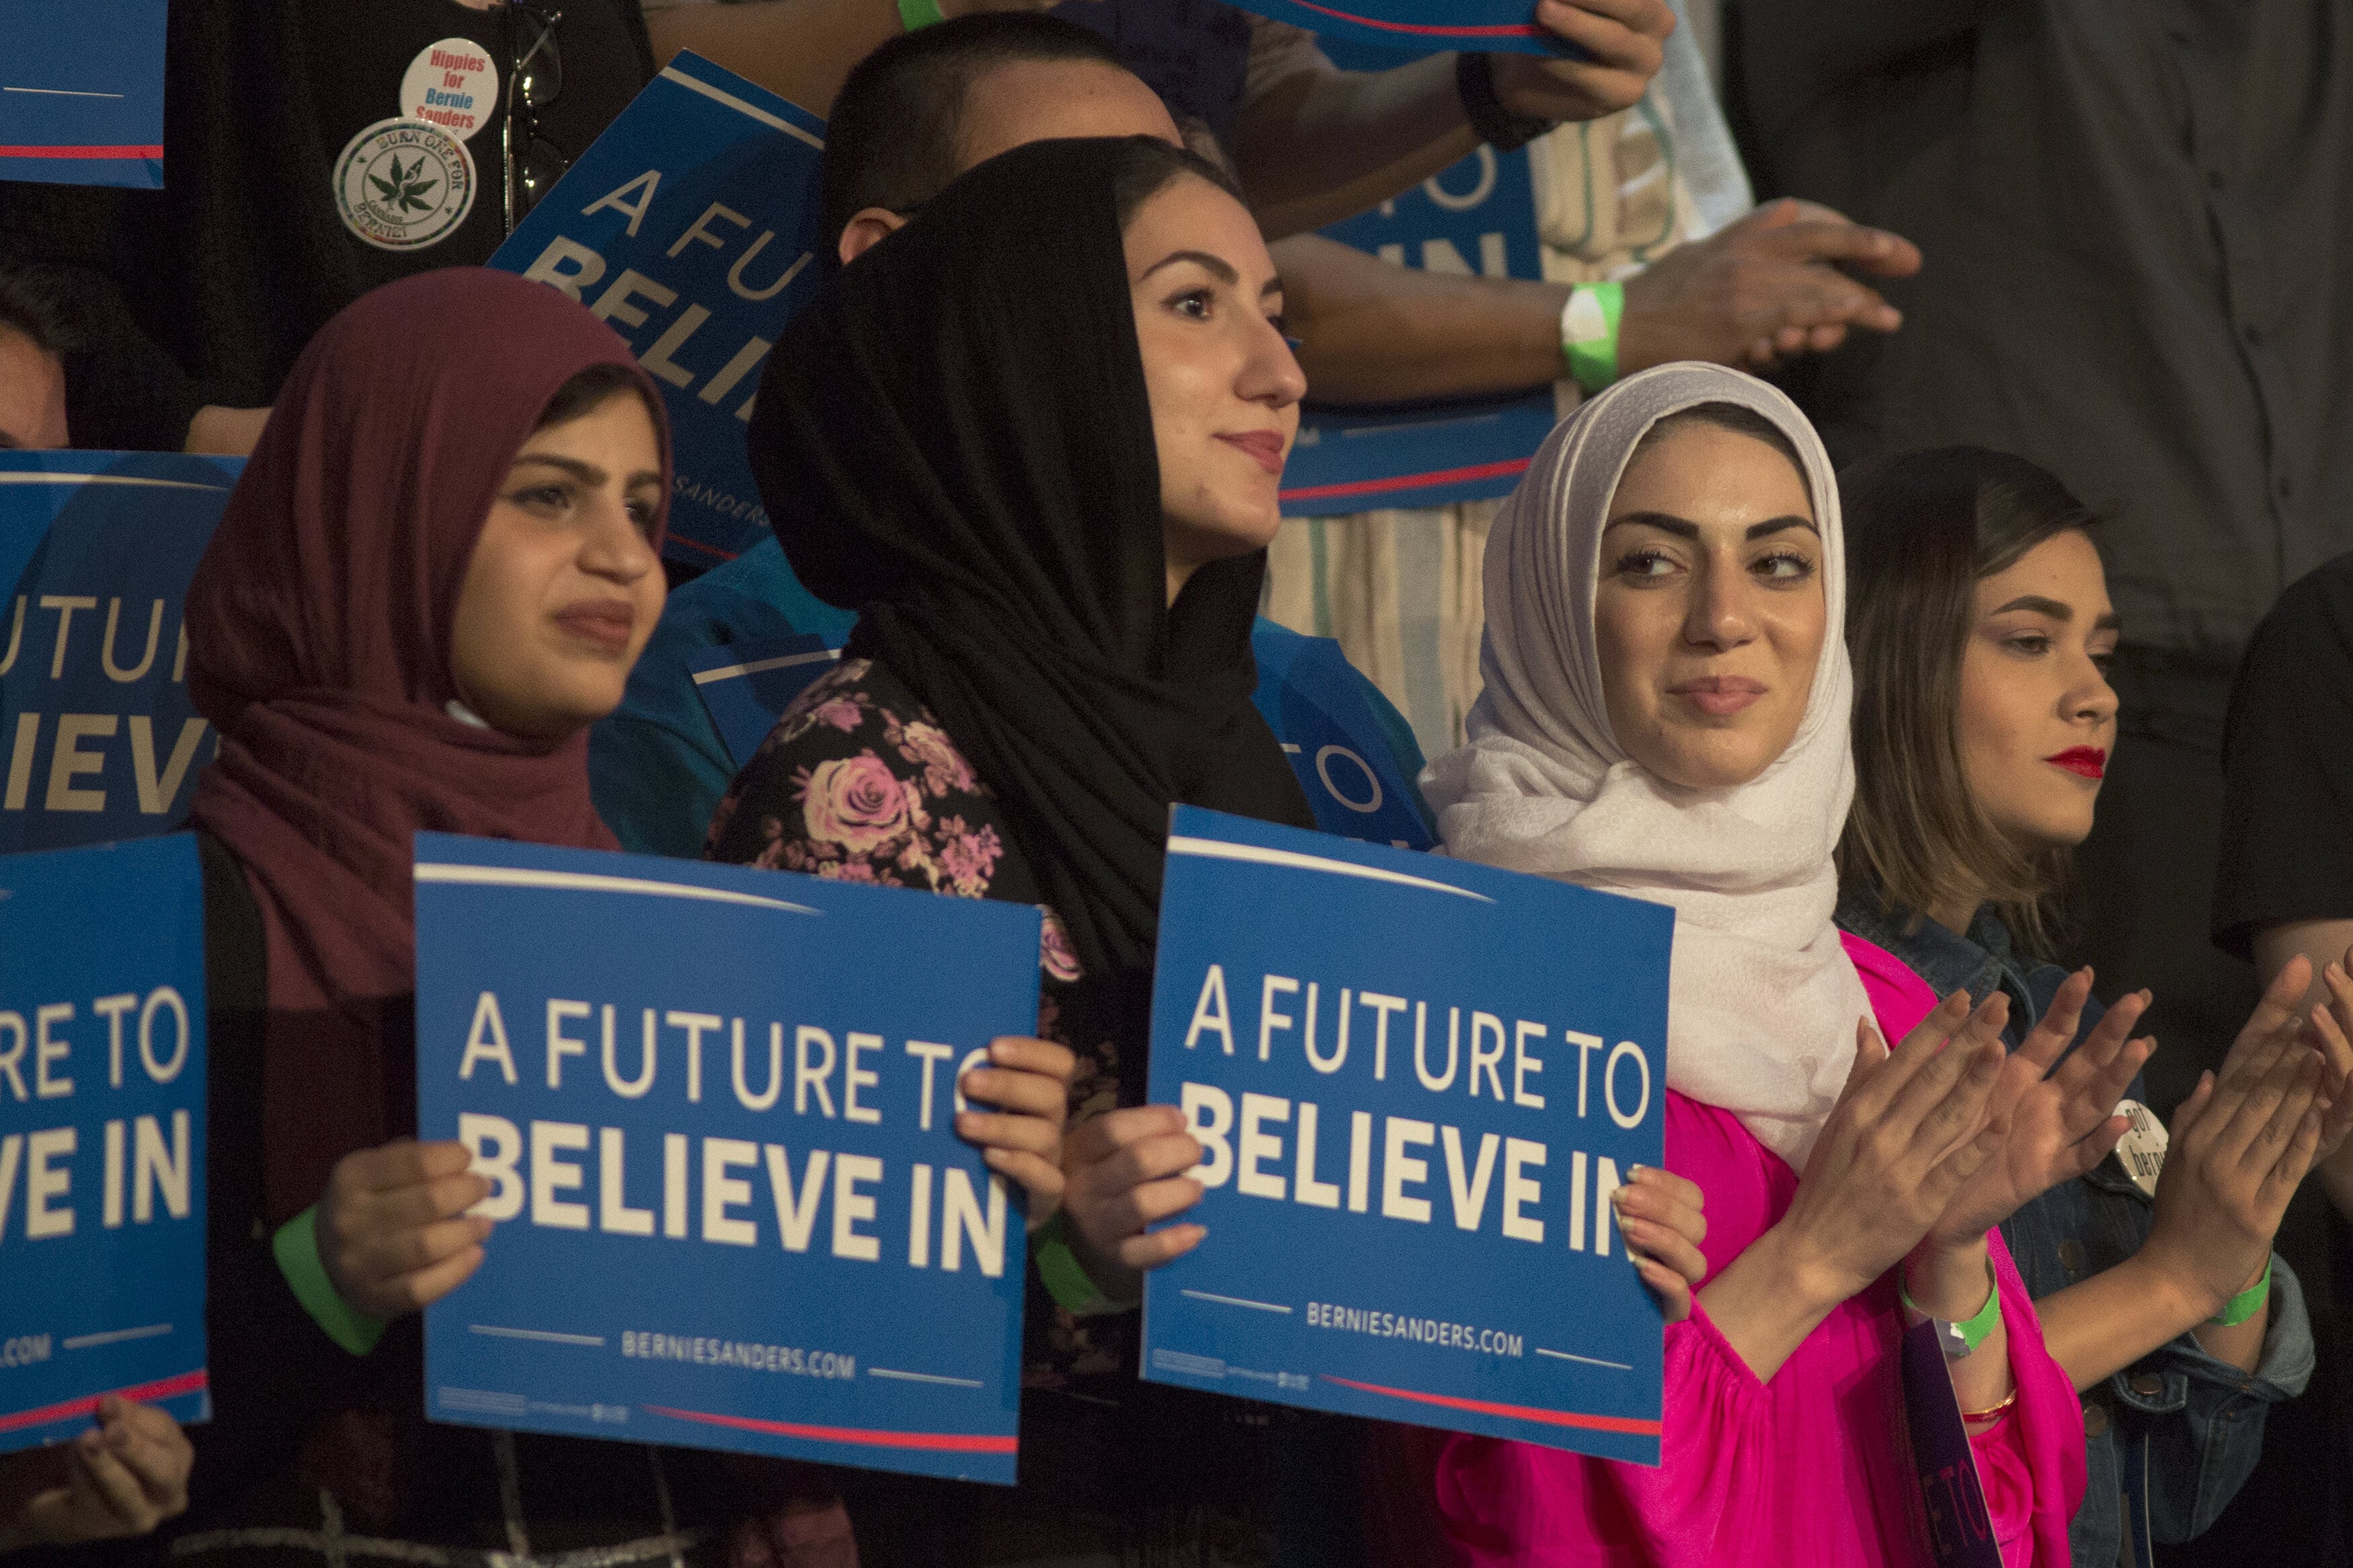 Muslim woman support Democratic presidential candidate Bernie Sanders at a campaign rally in California